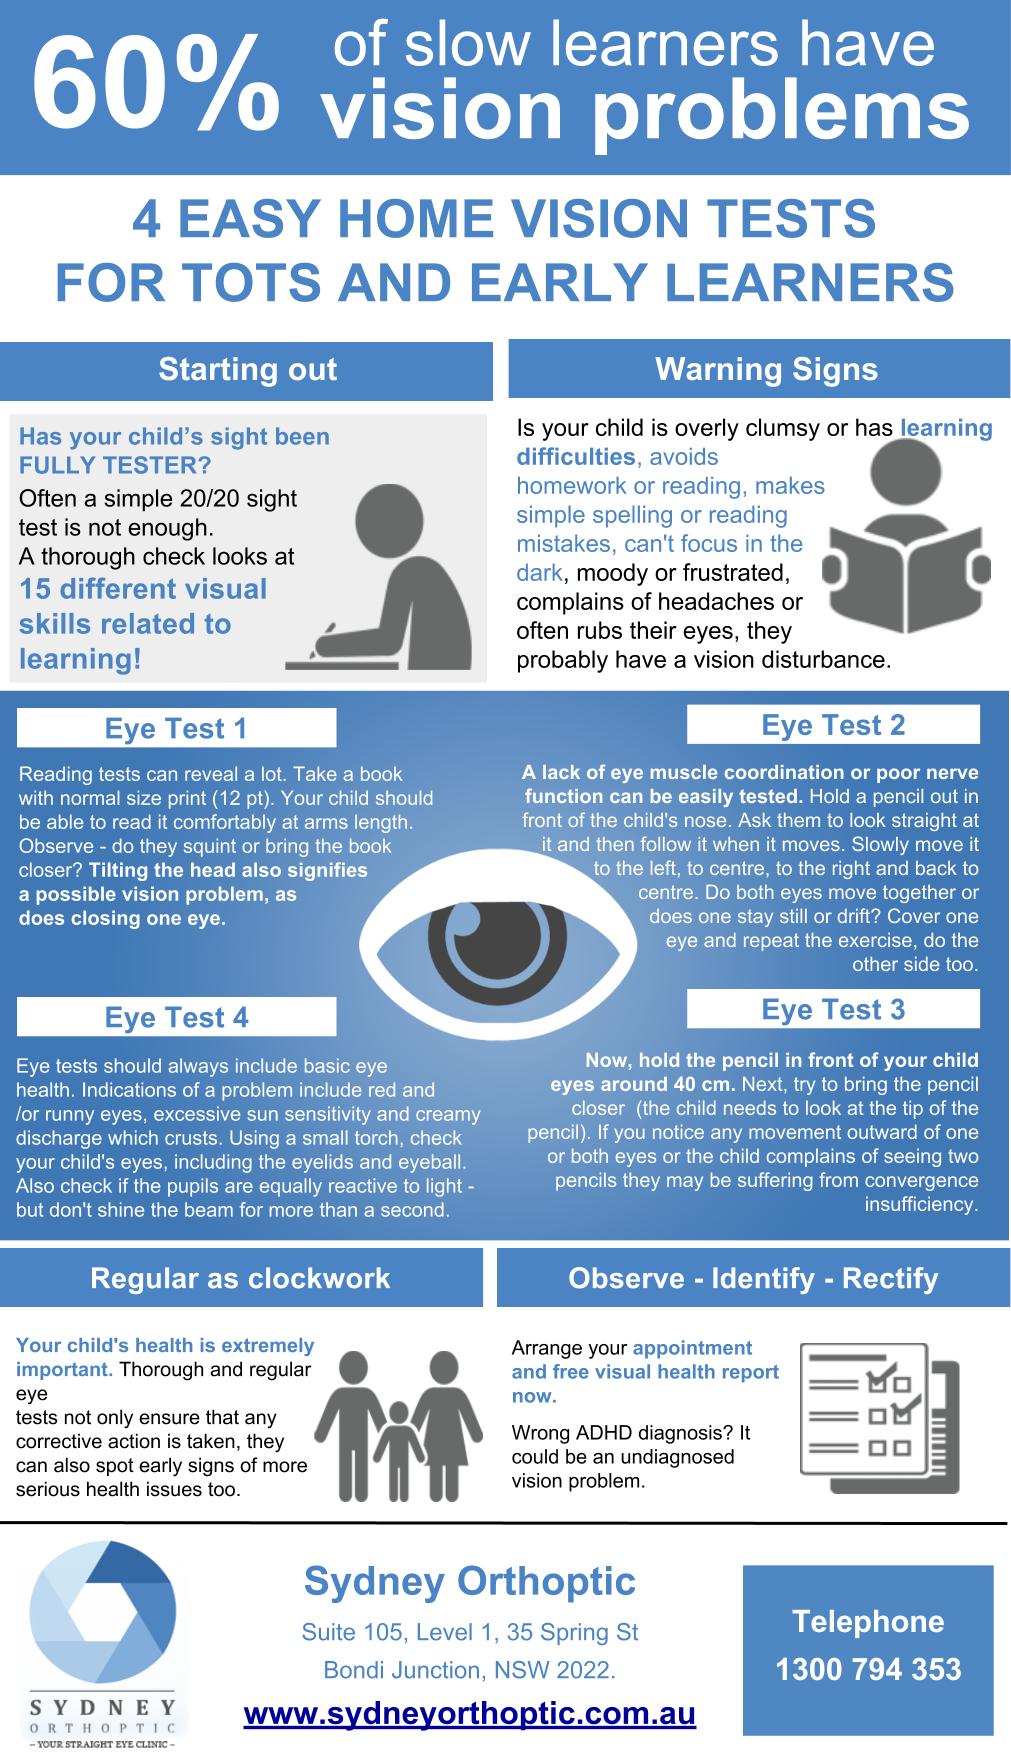 Home vision tests